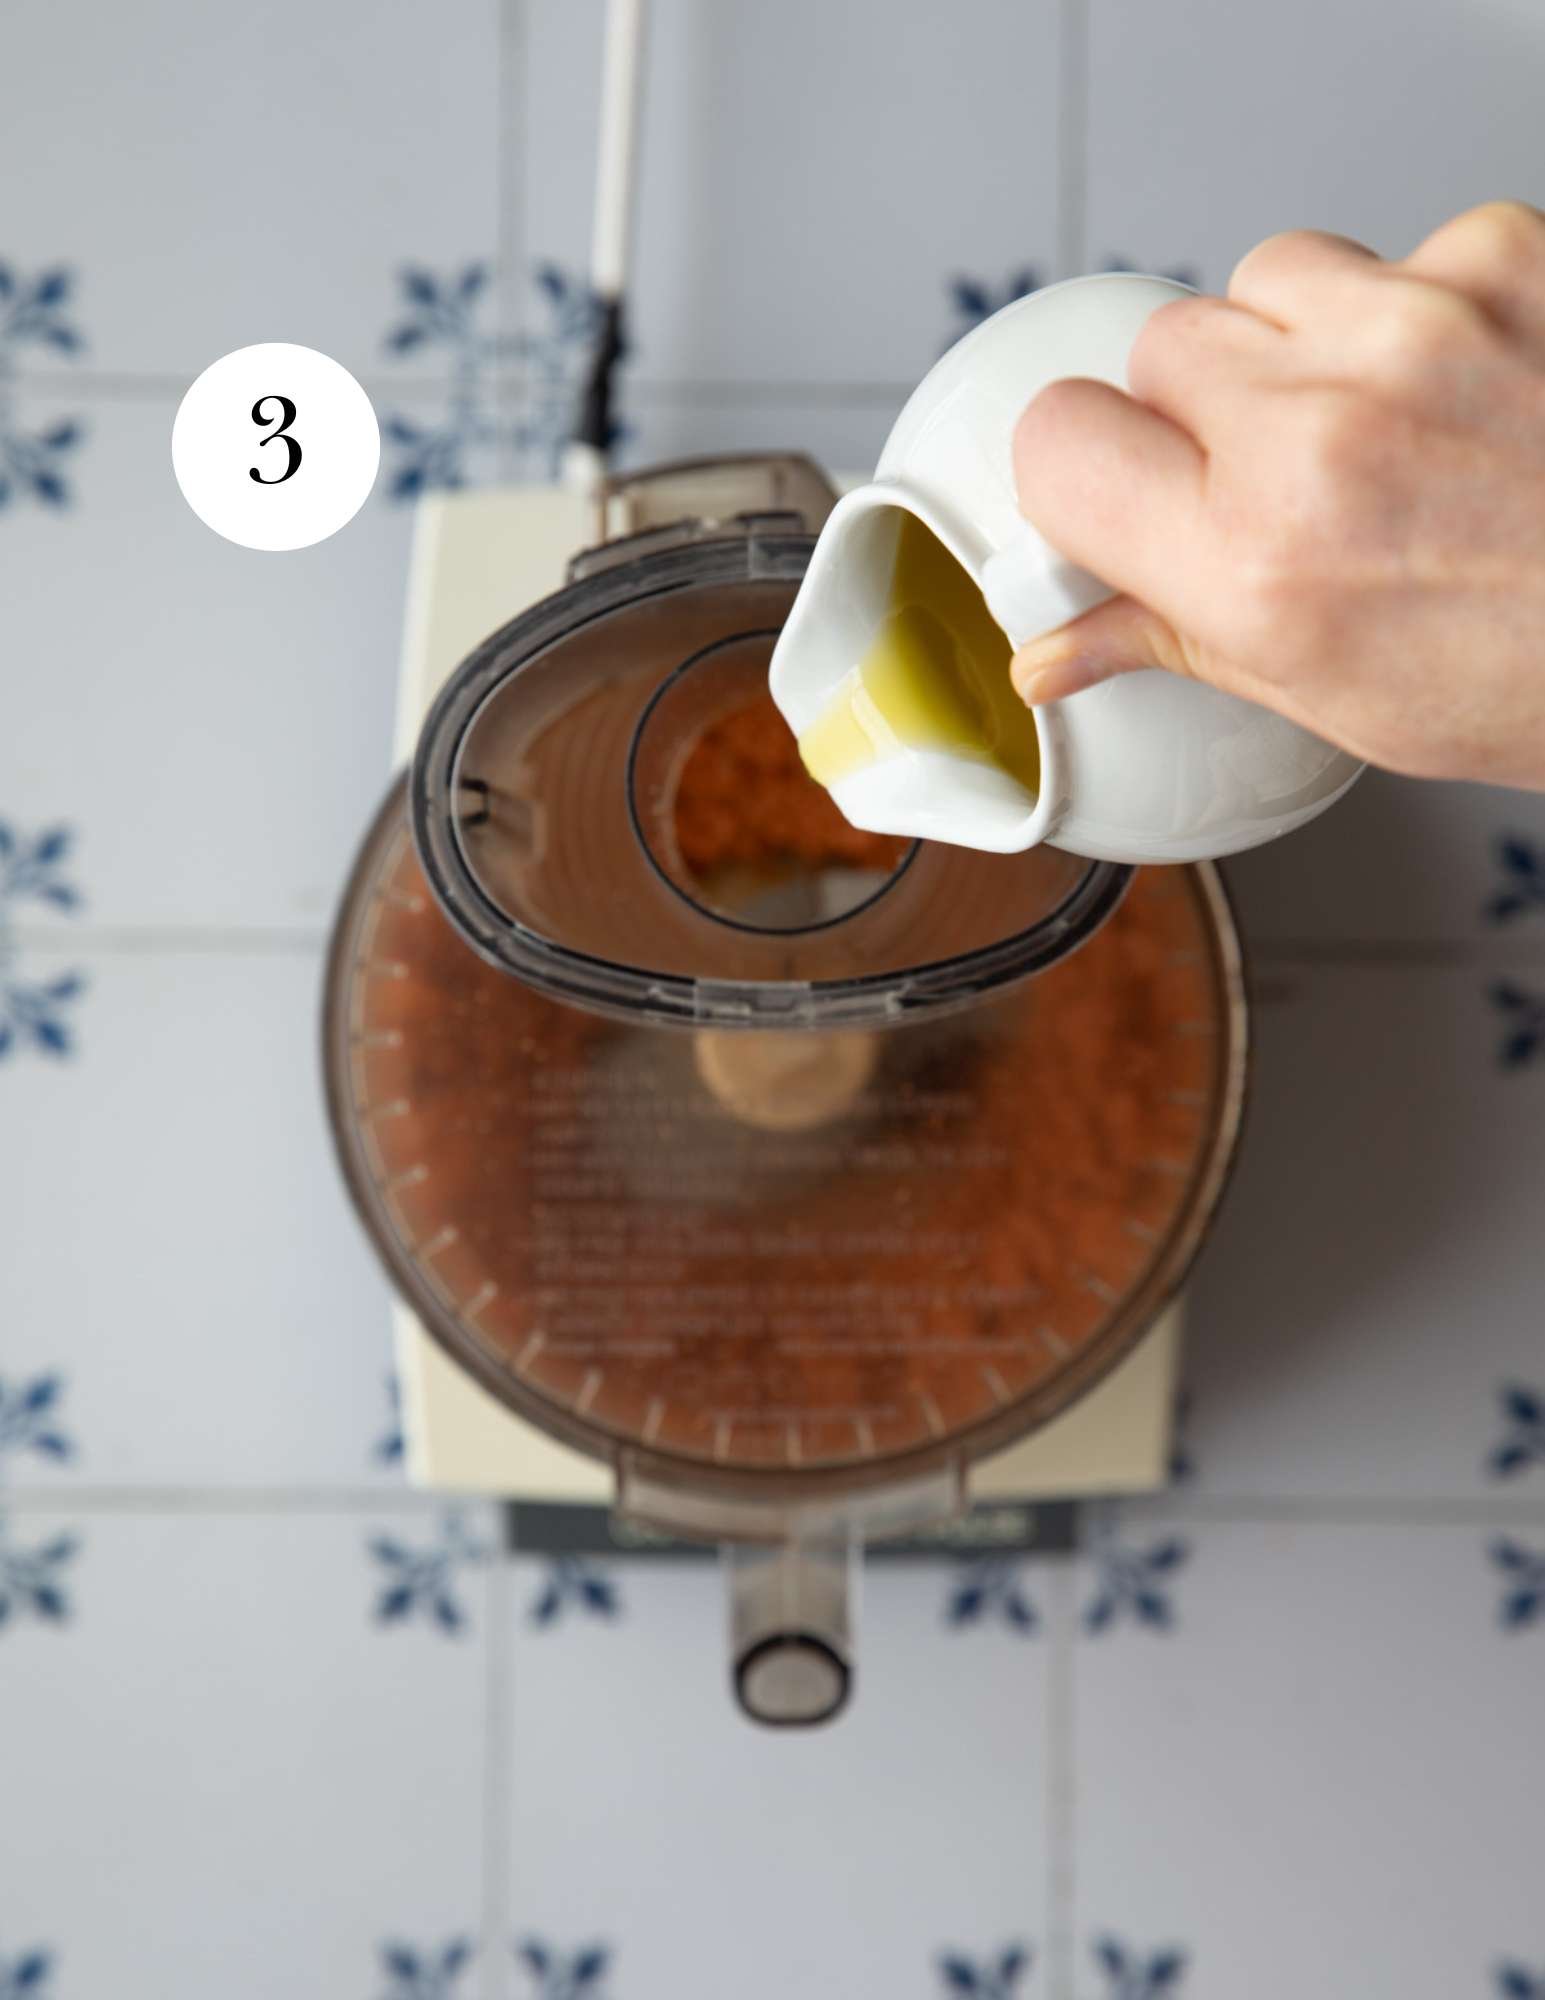 pouring olive oil into a food processor.